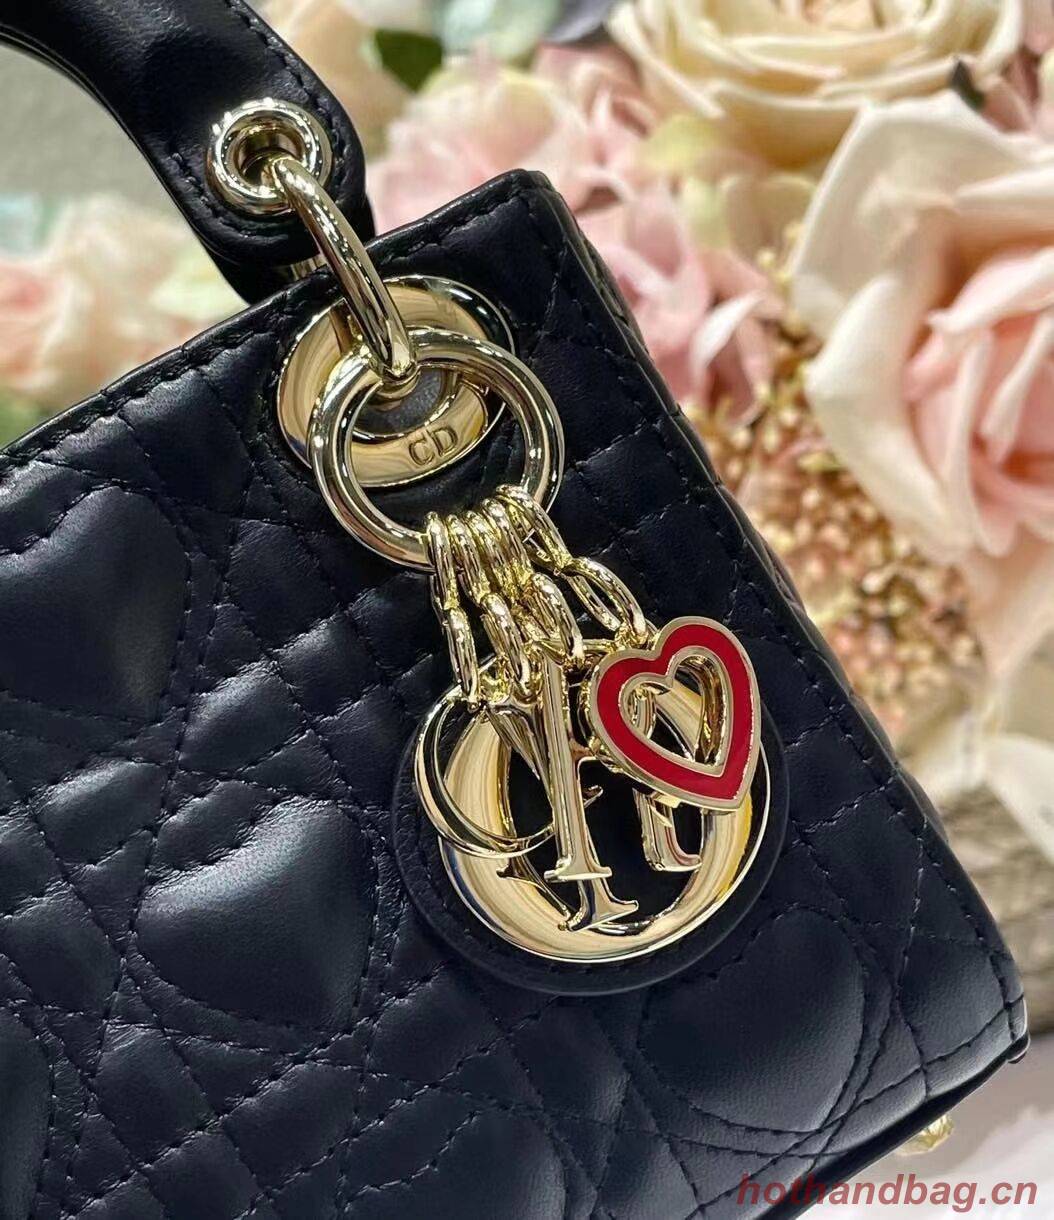 MICRO DIORAMOUR LADY DIOR BAG black Cannage Lambskin with Heart Motif S0856ON